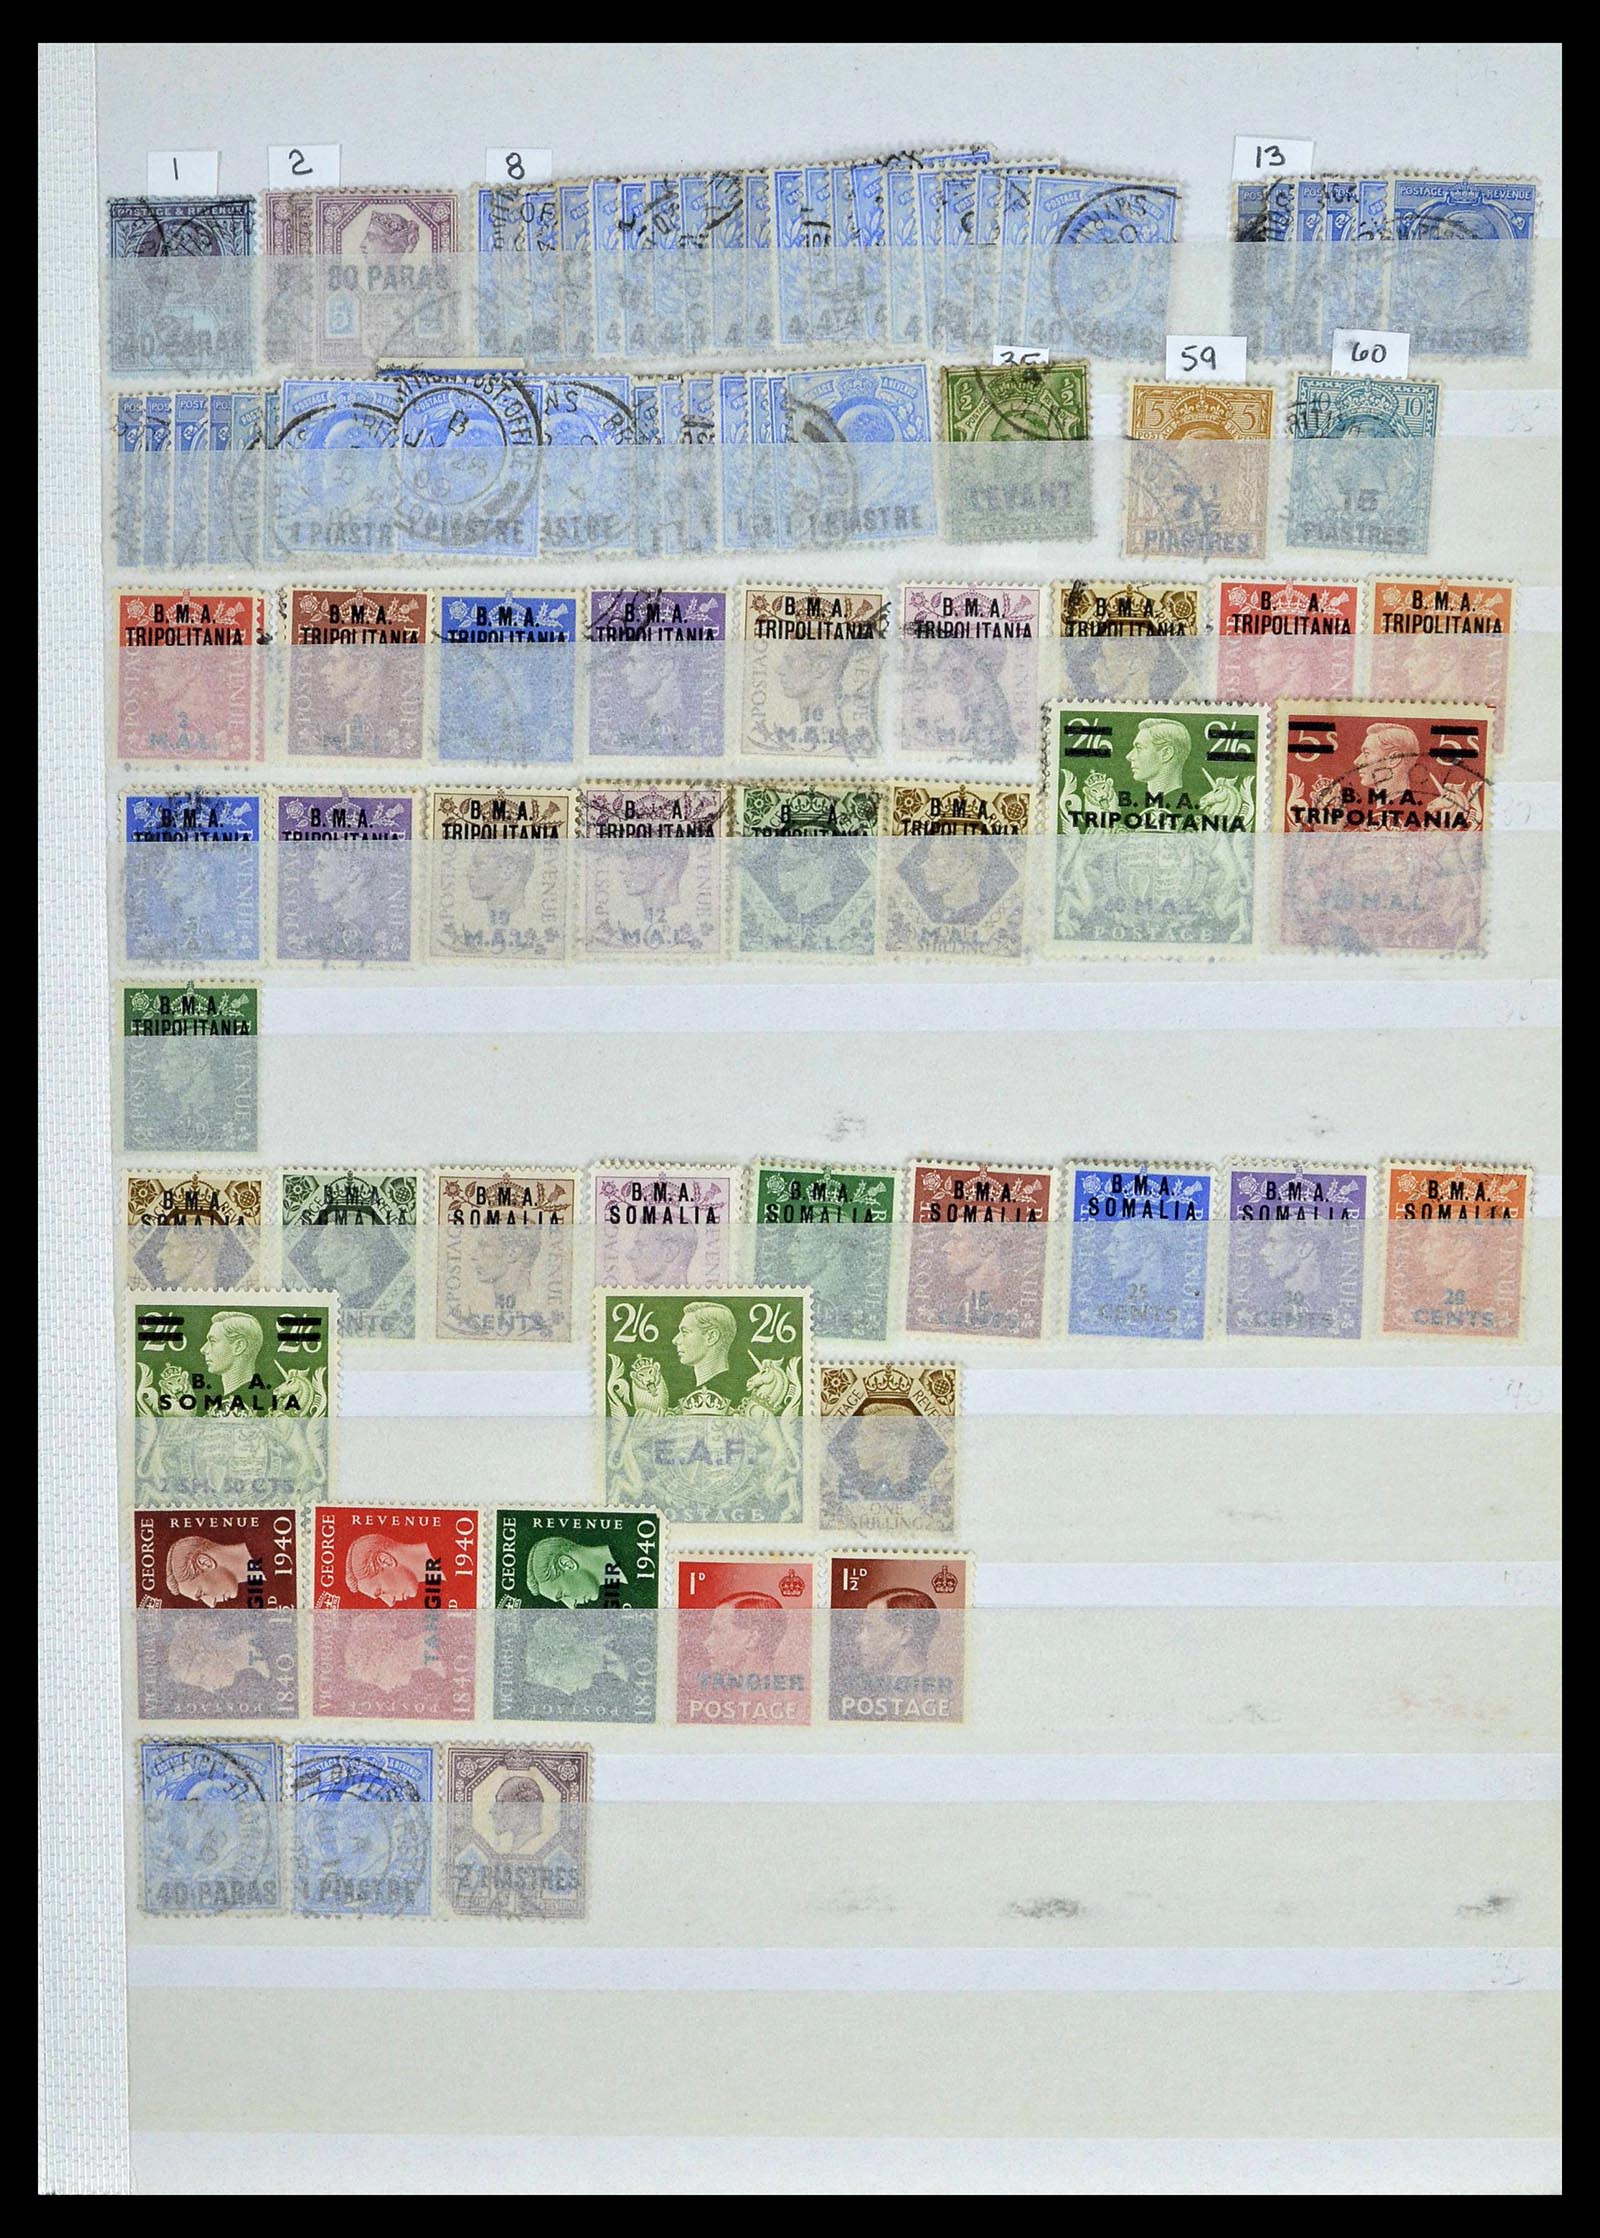 39196 0060 - Stamp collection 39196 Great Britain 1844-1955.